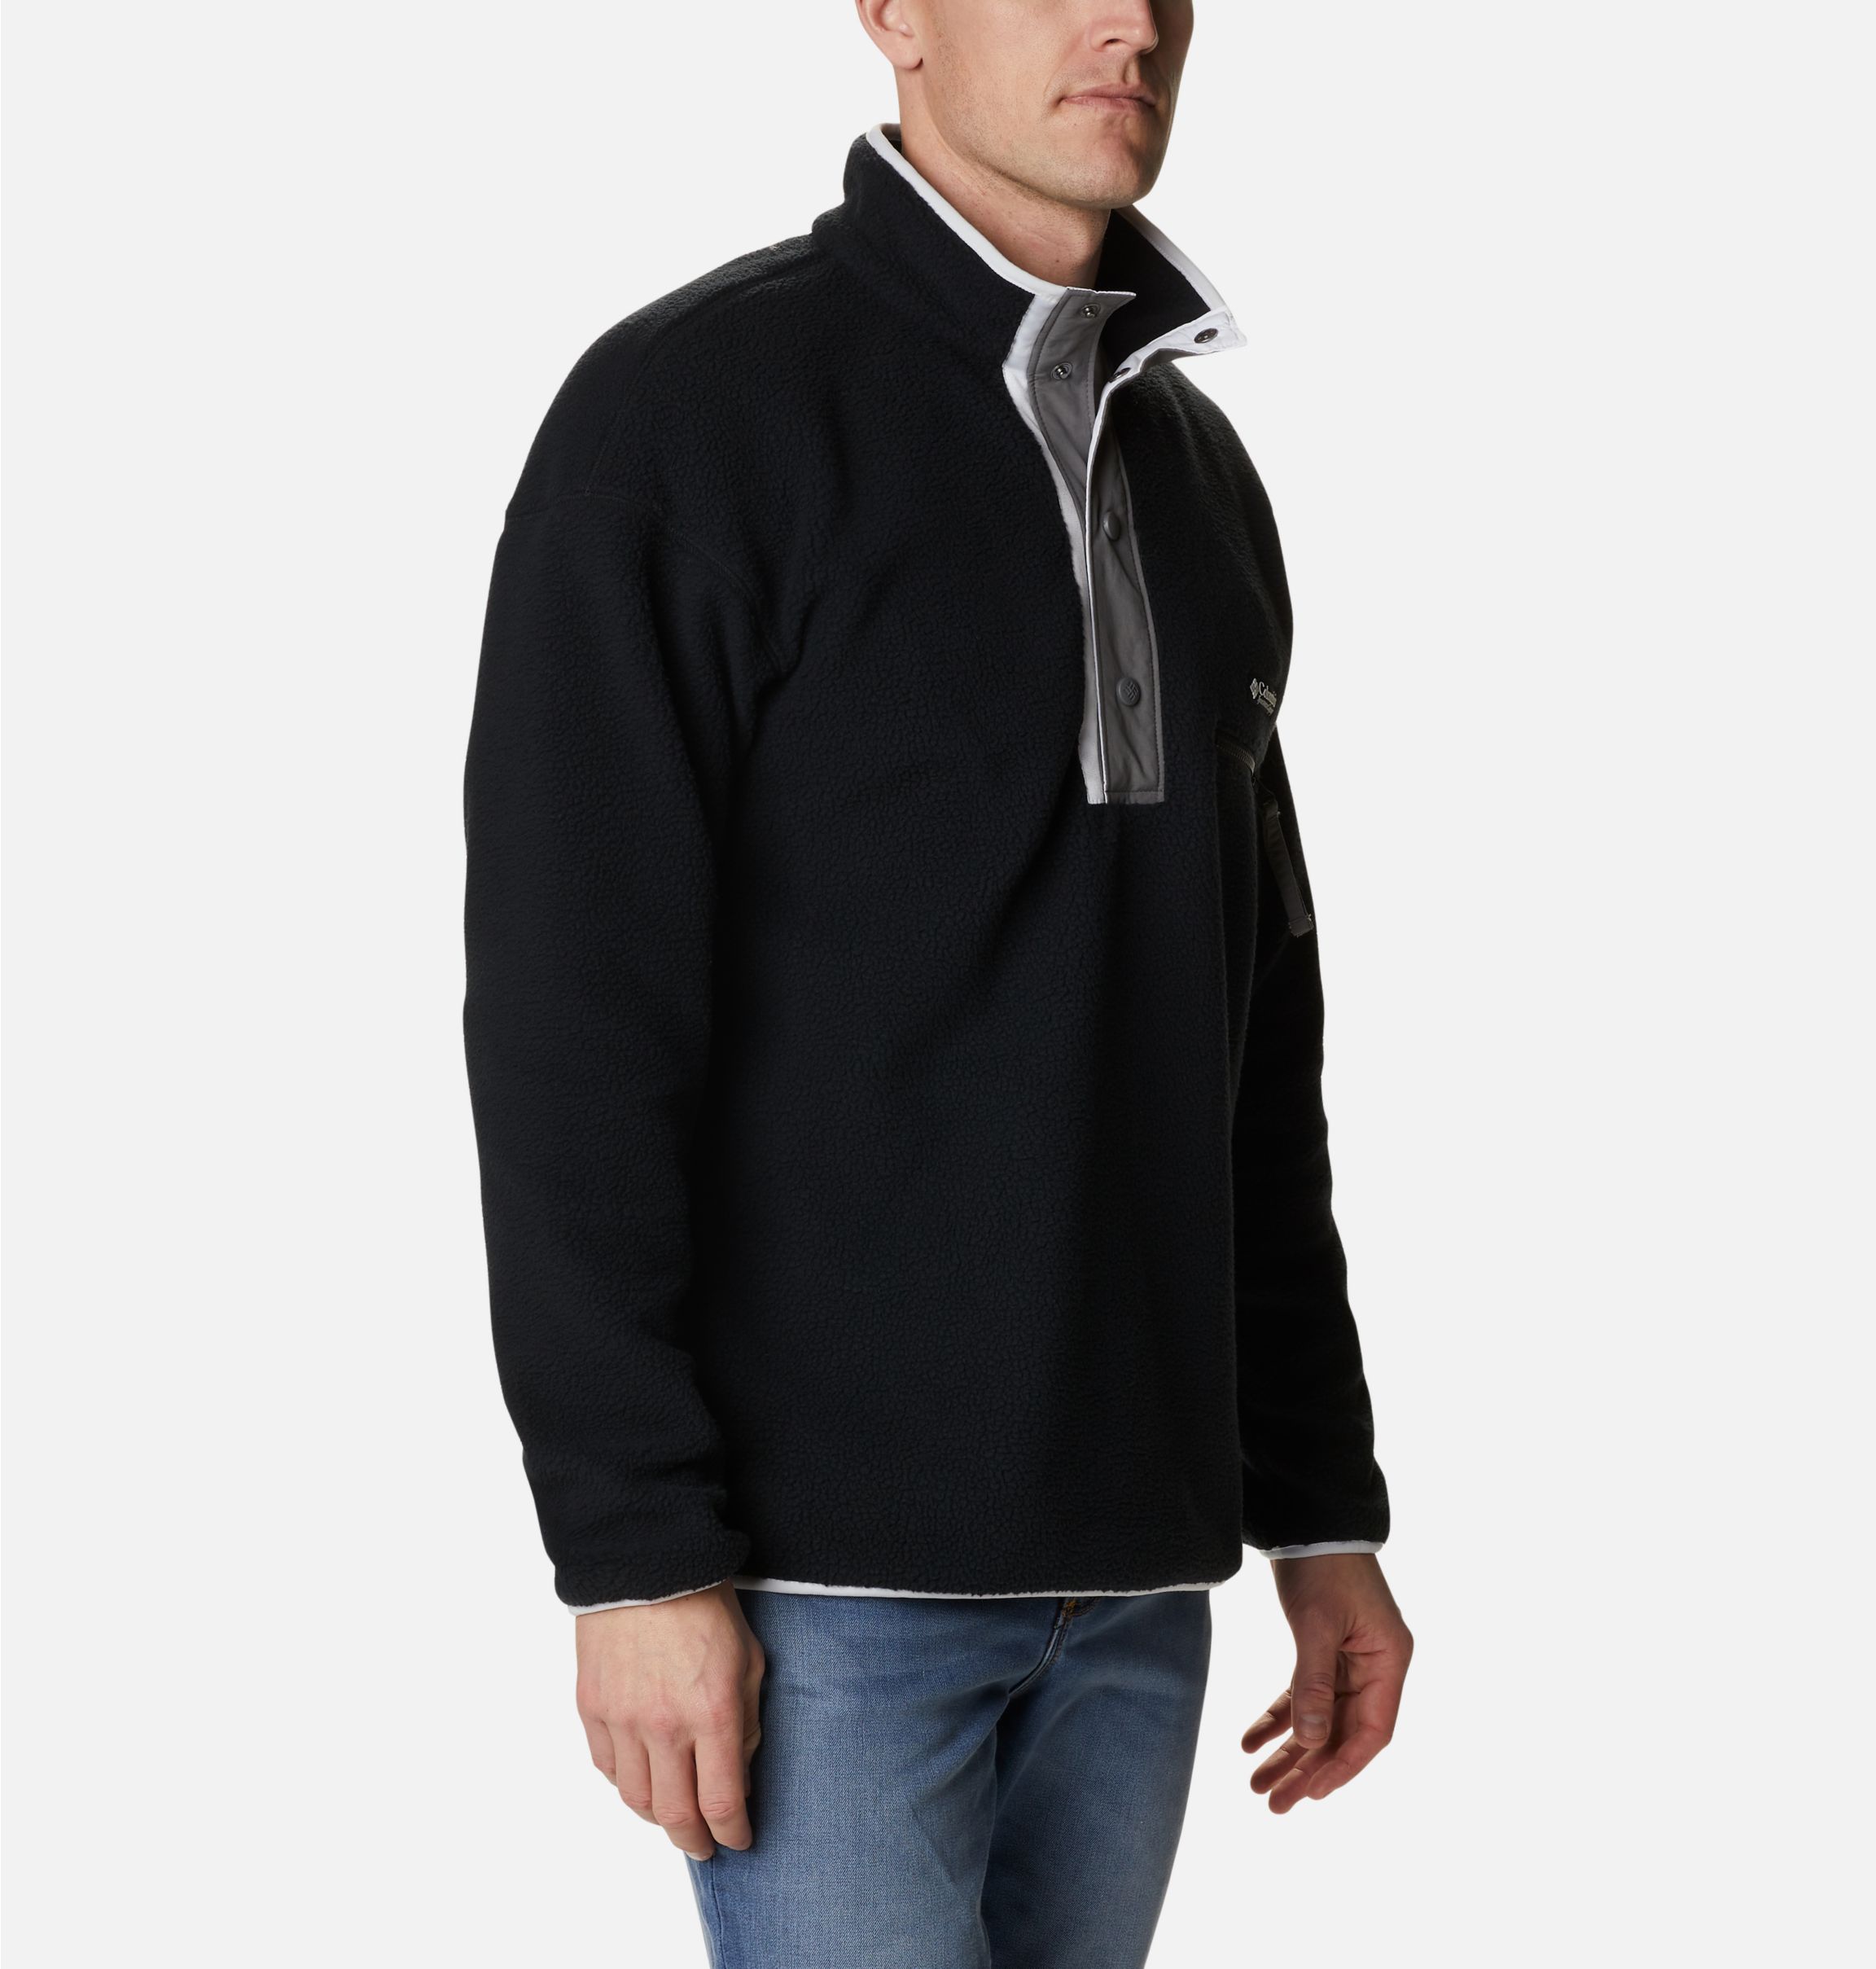 The iconic Helvetia Half-Snap Fleece Pullover features Sherpa pile